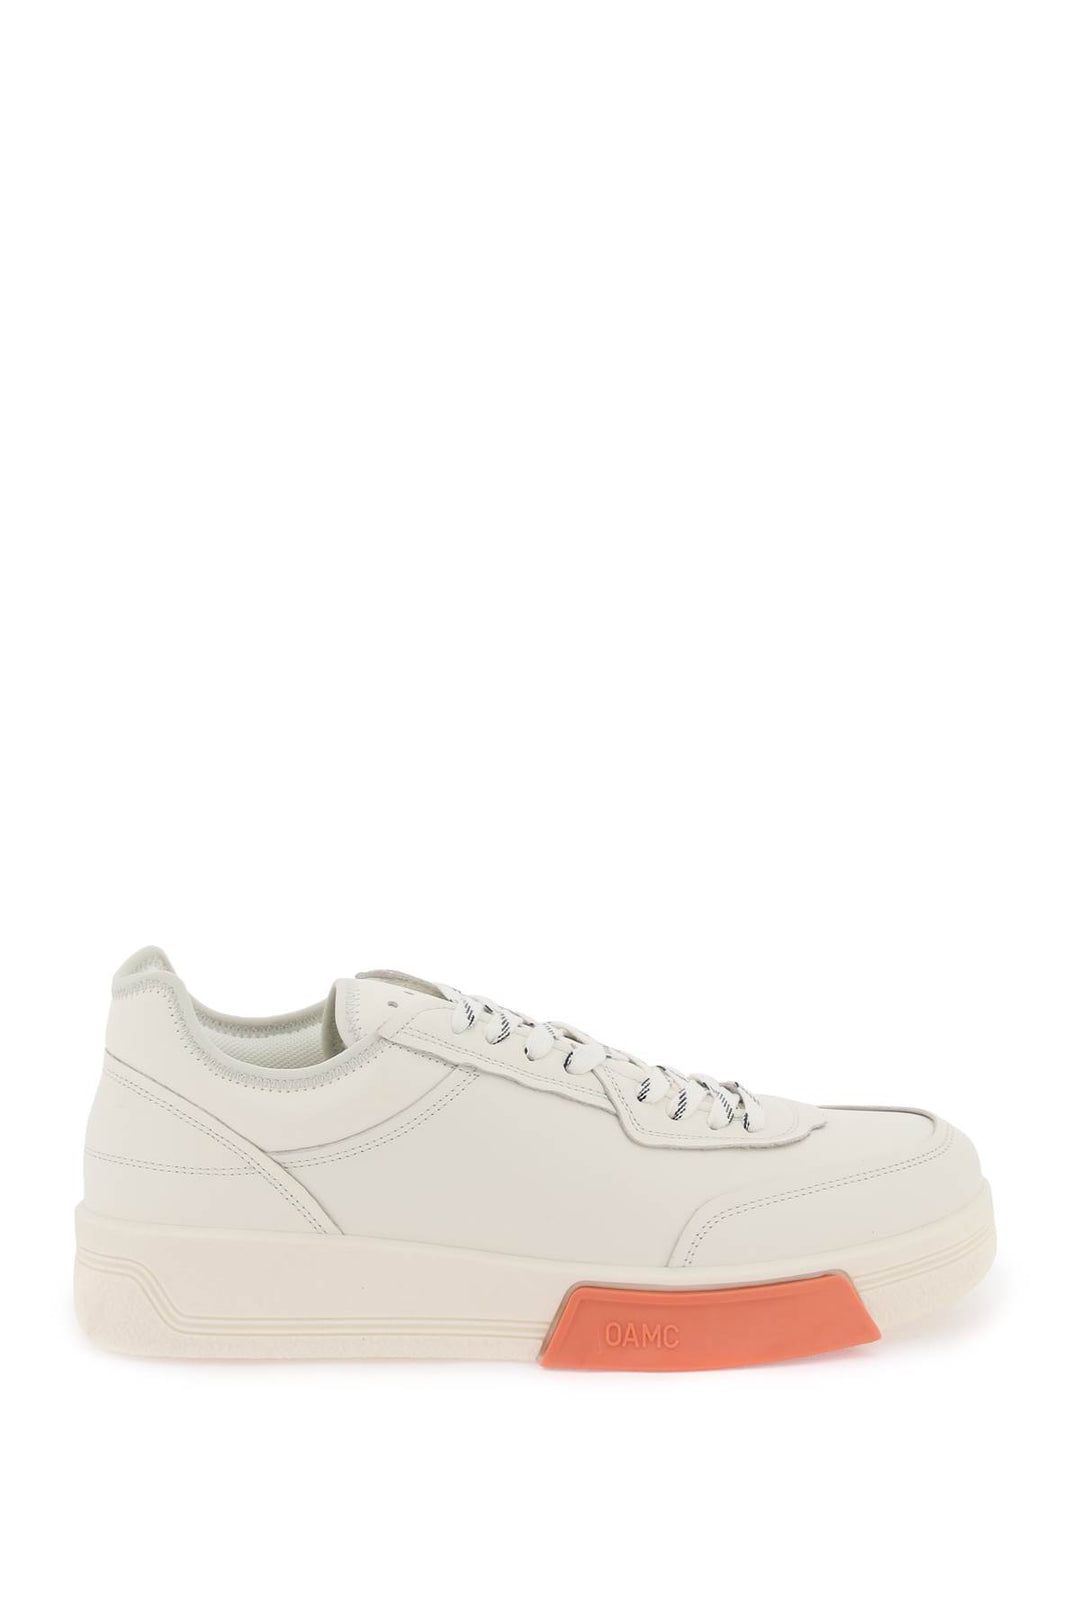 Oamc 'Cosmos Cupsole' Sneakers   Bianco